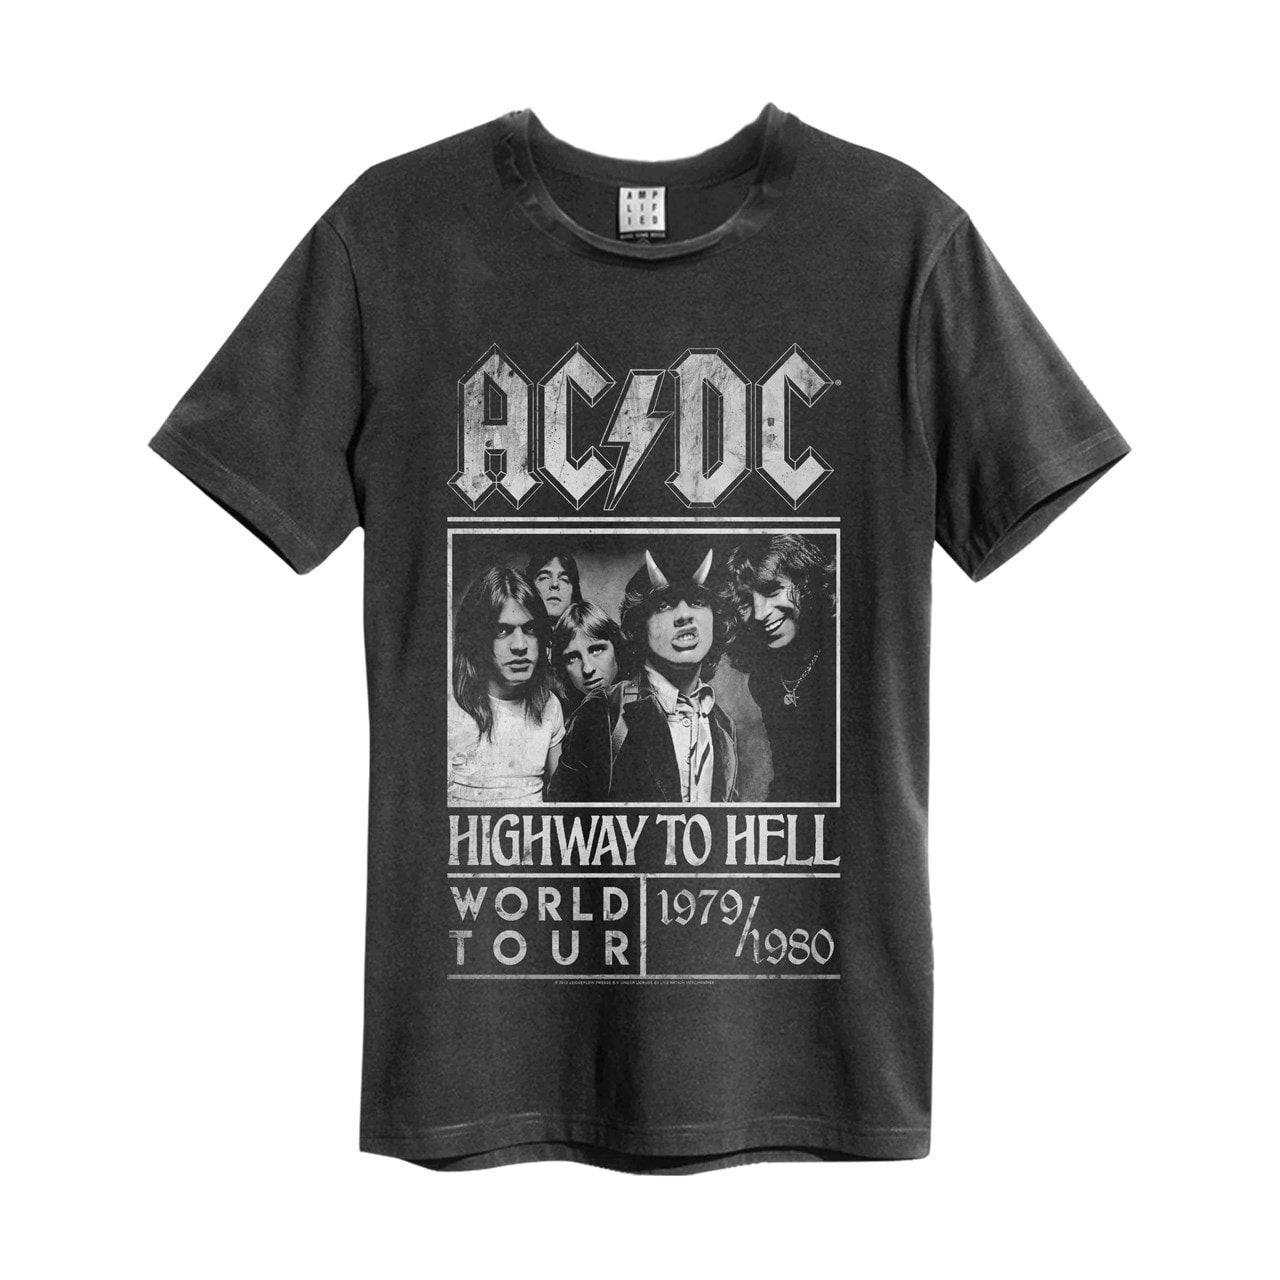 Acdc highway to hell. Футболка AC/DC Highway to Hell 1979 tourtsirt. AC DC Highway to Hell футболка. AC DC Highway to Hell 1979. Плакат AC DC Highway to Hell.